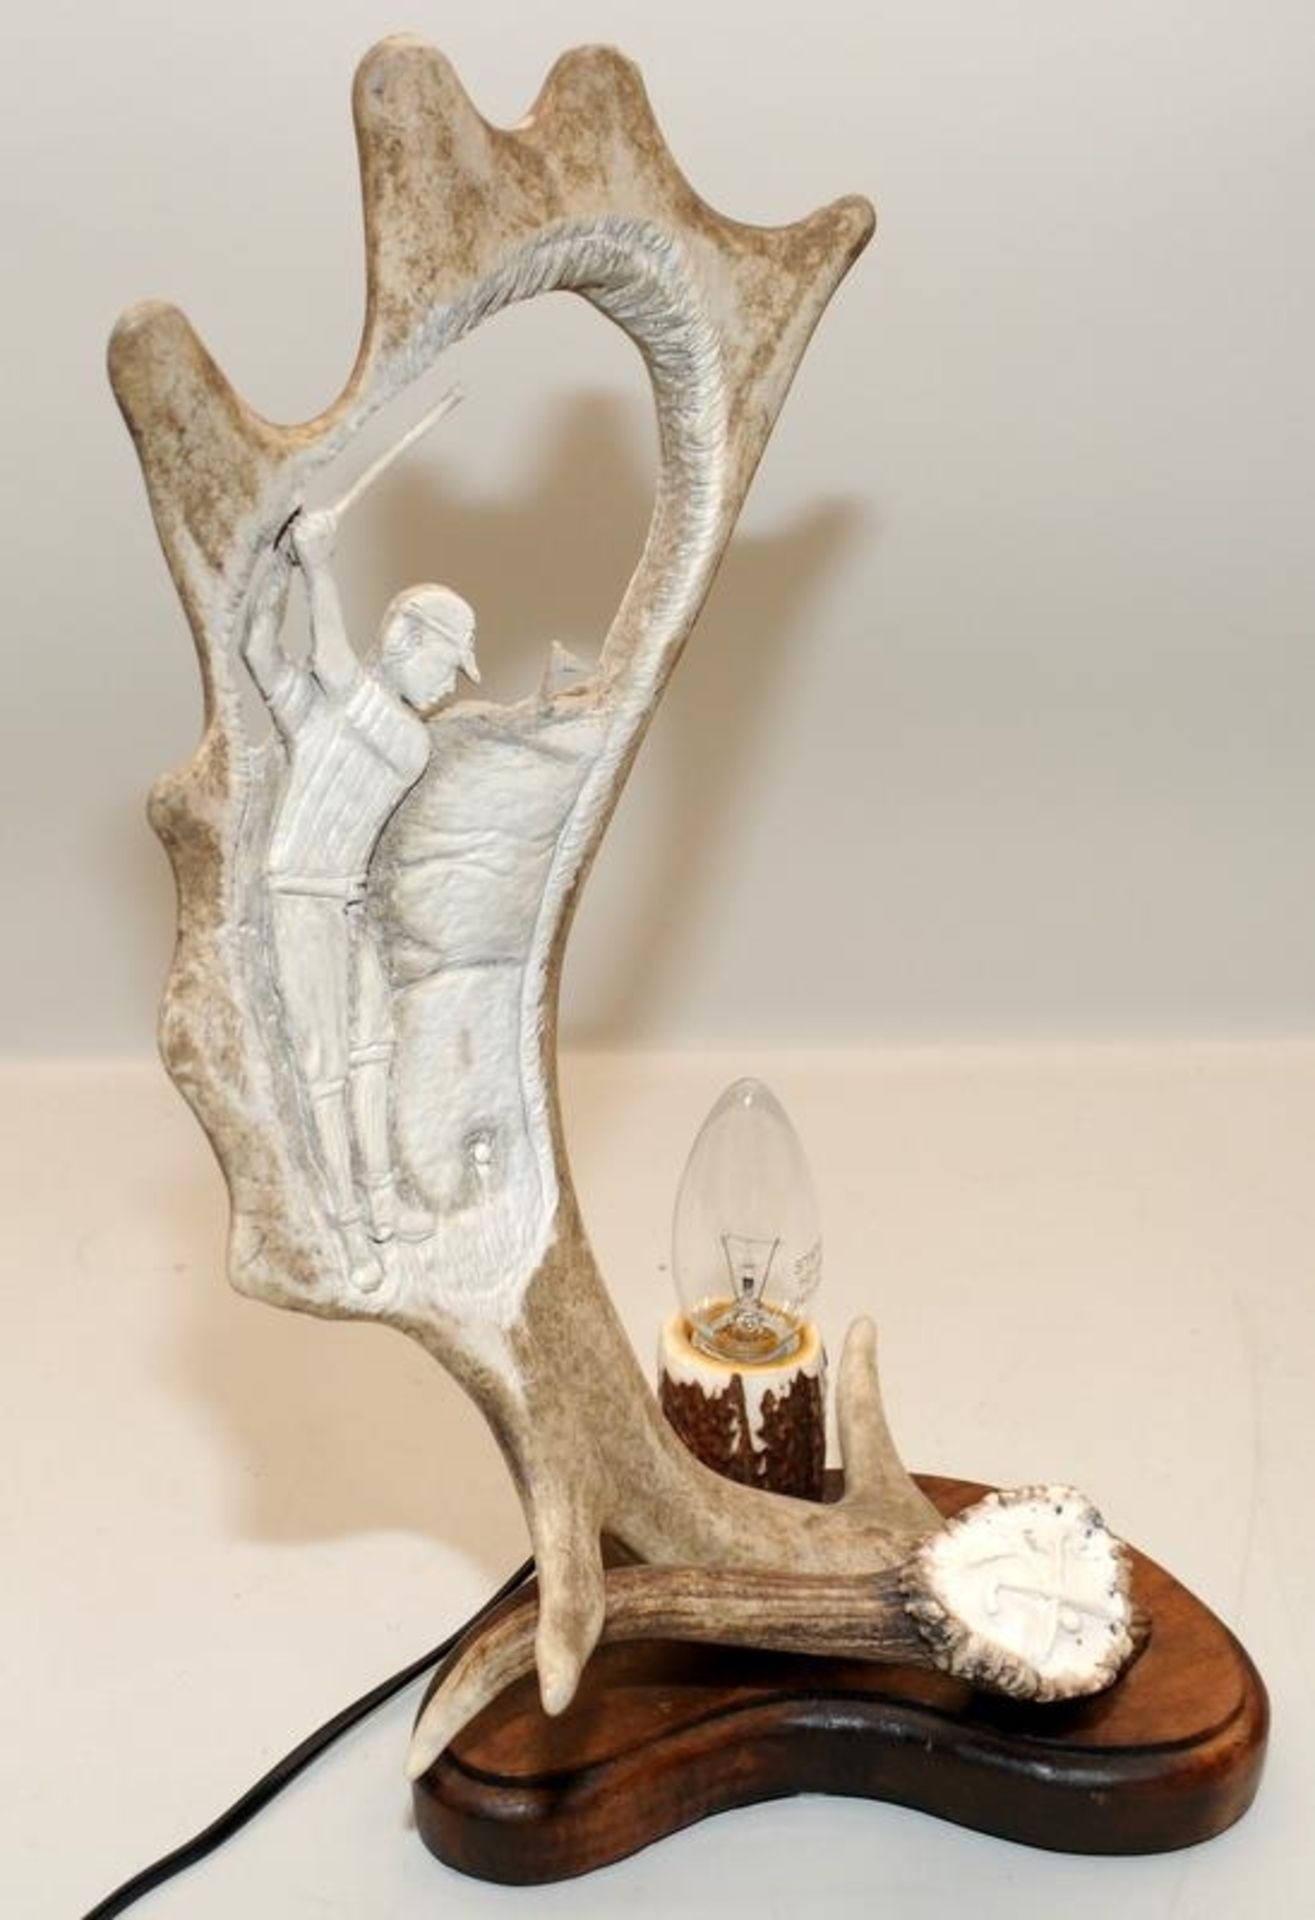 Antler horn with incised carving on a golfing theme. Mounted on a wooden base and incorporating a - Image 2 of 3